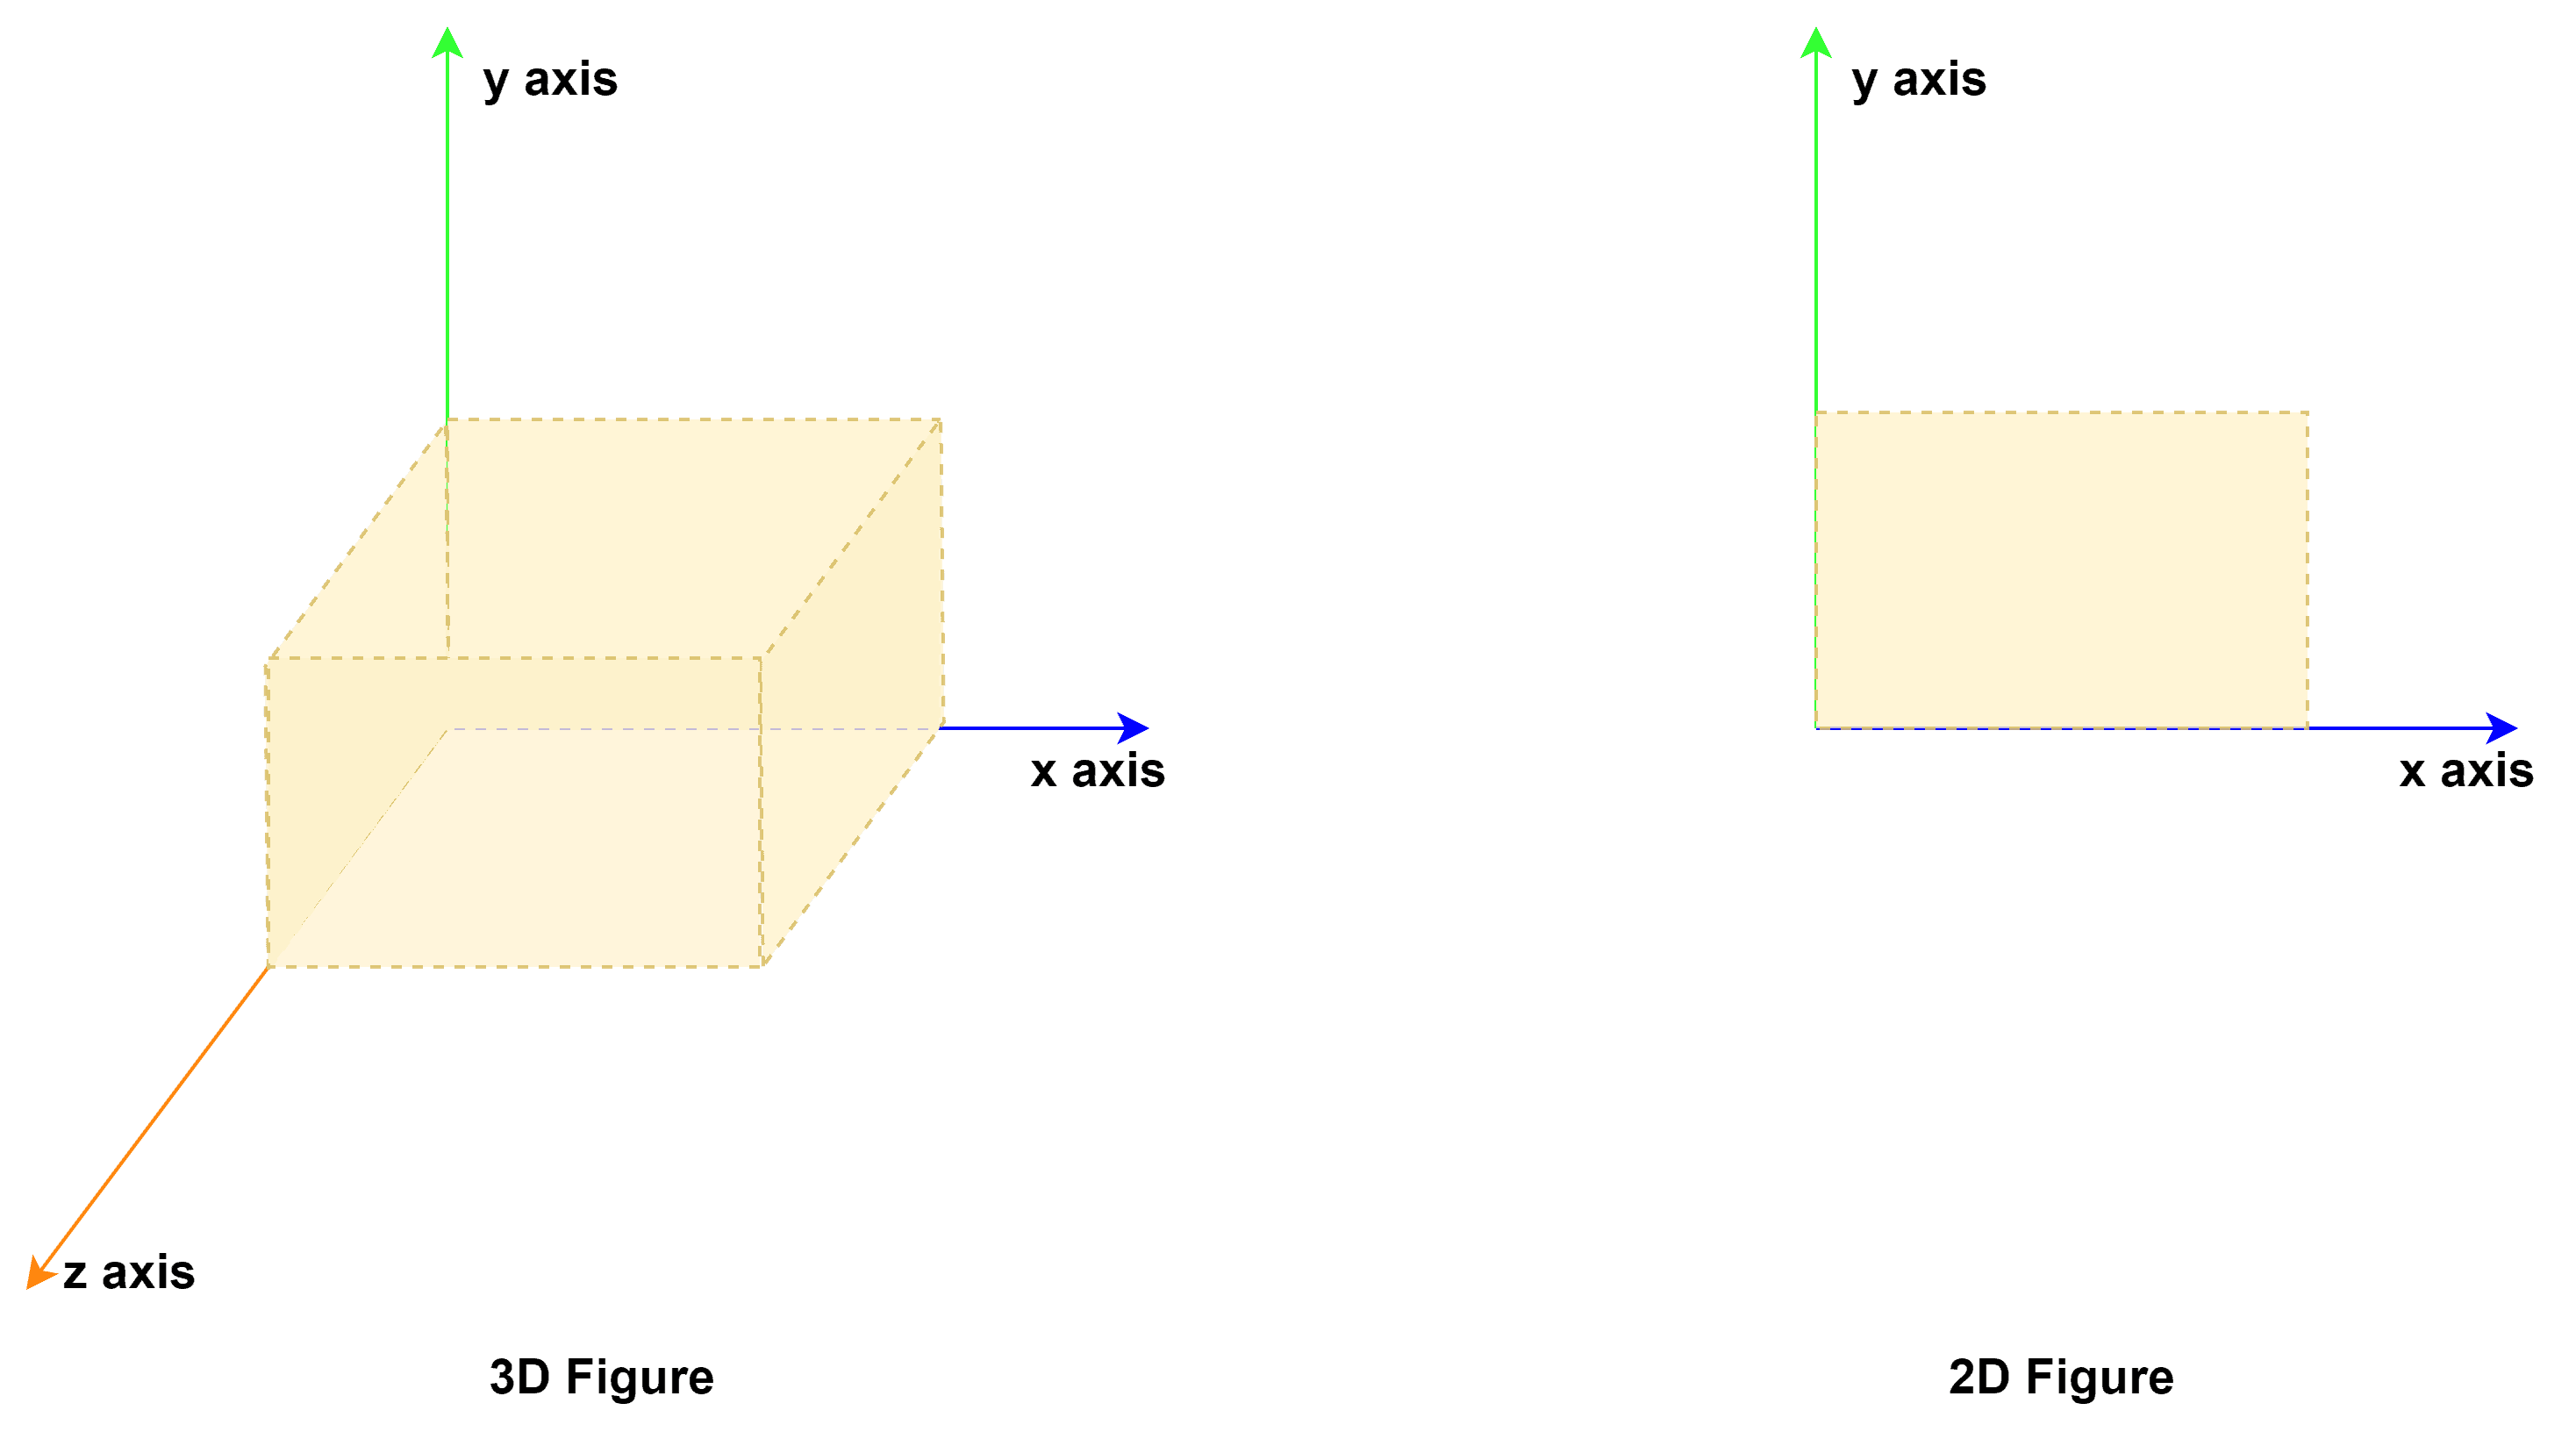 Example of 3D figure before projection and the resulting 2D figure